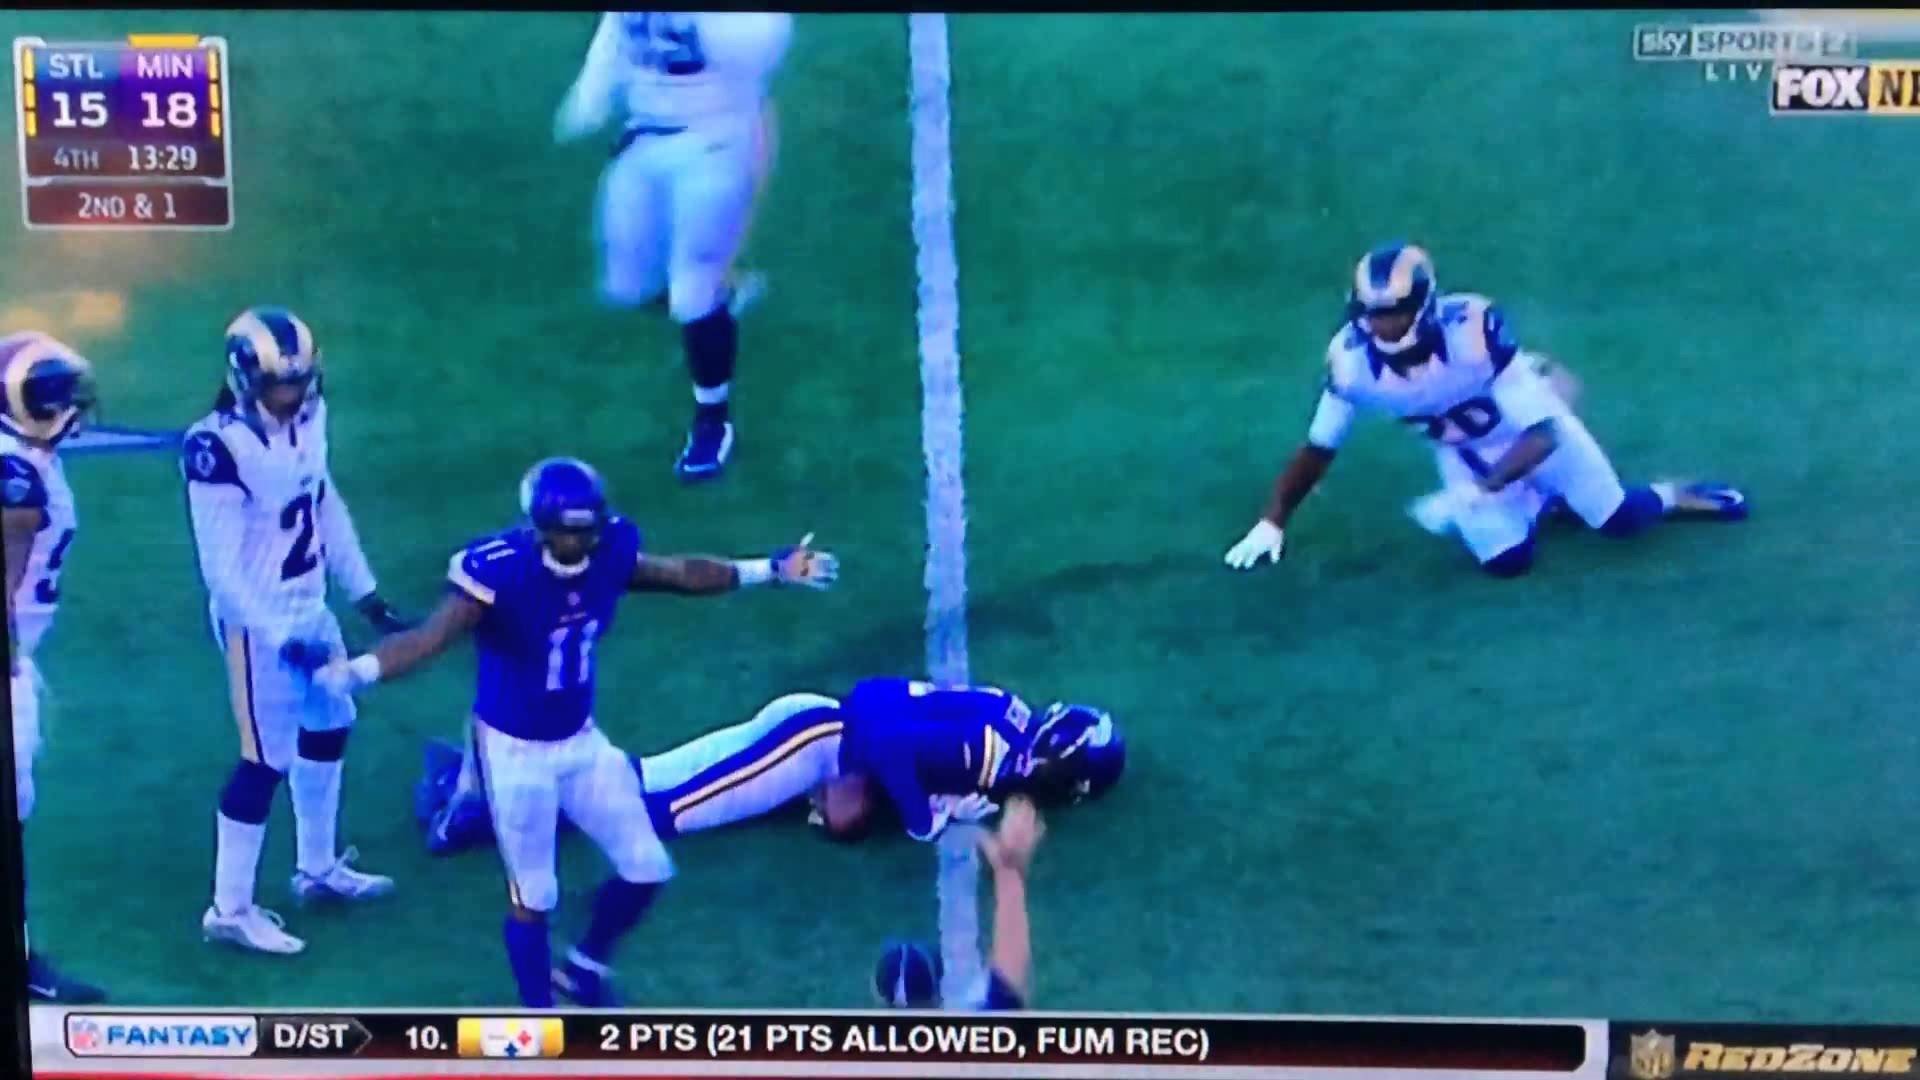 1920x1080 Teddy Bridgewater Knocked out cold 08/11/15